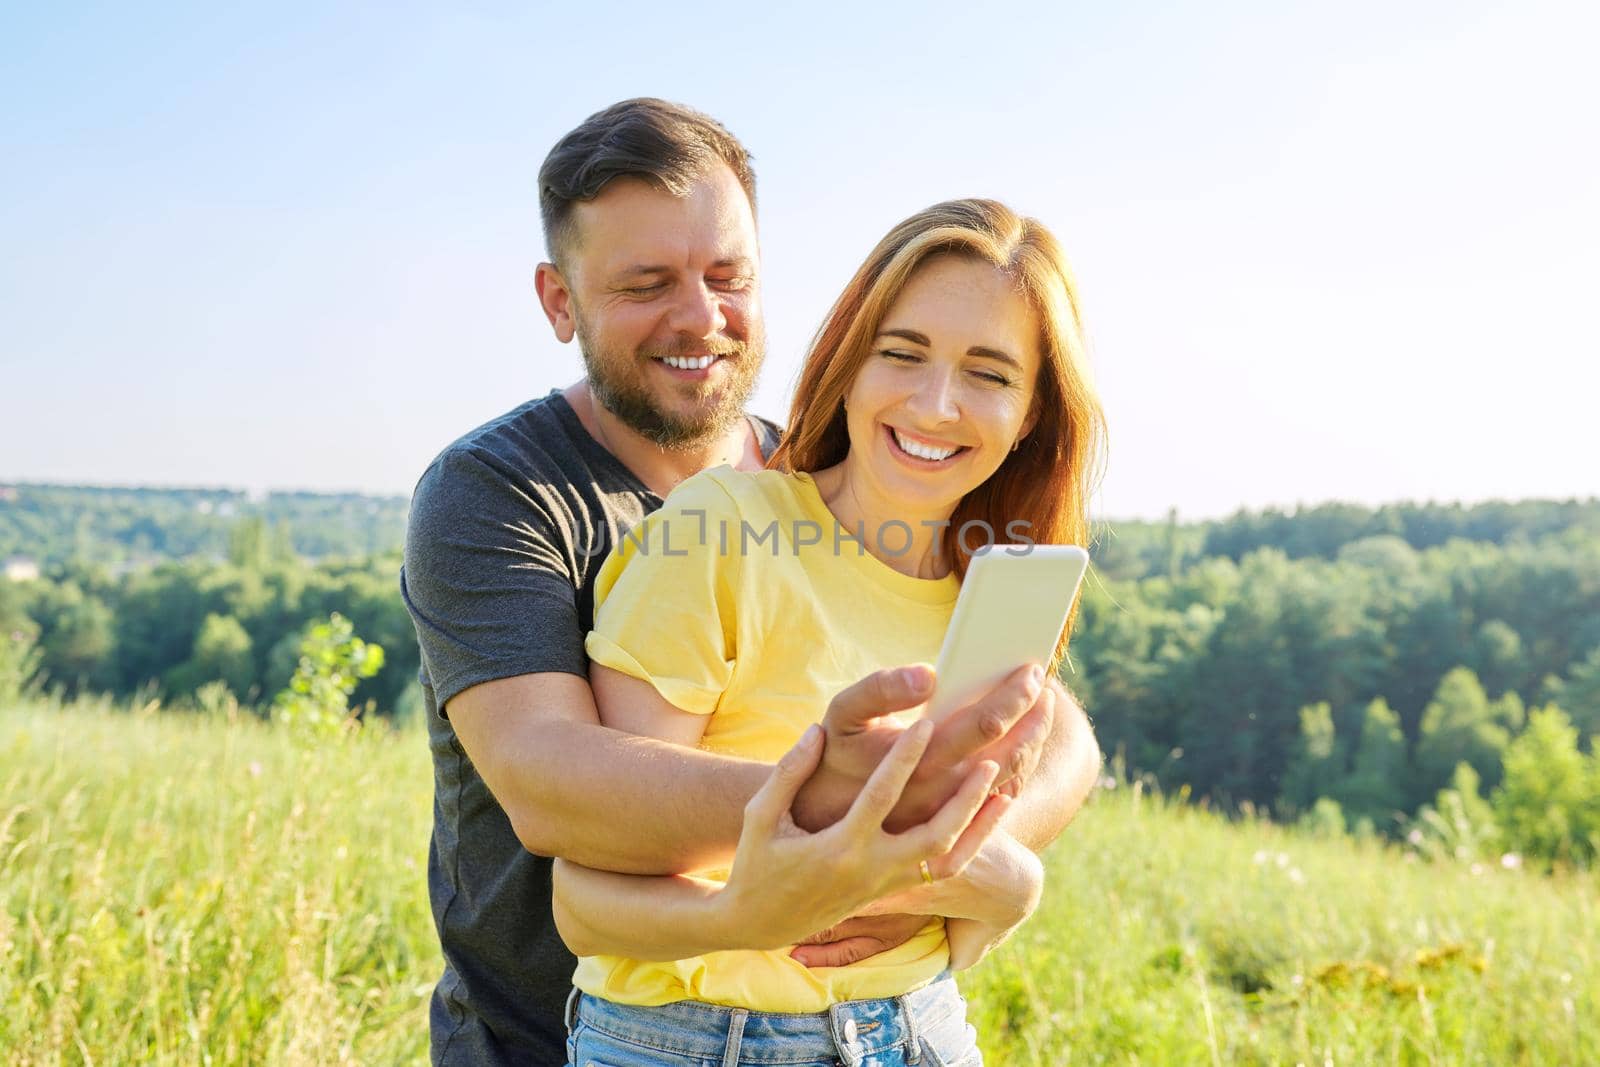 Beautiful happy adult couple taking selfie on smartphone, sunny summer day meadow forest sky background. Relationships, happiness, relaxation, love, people 30s 40s age